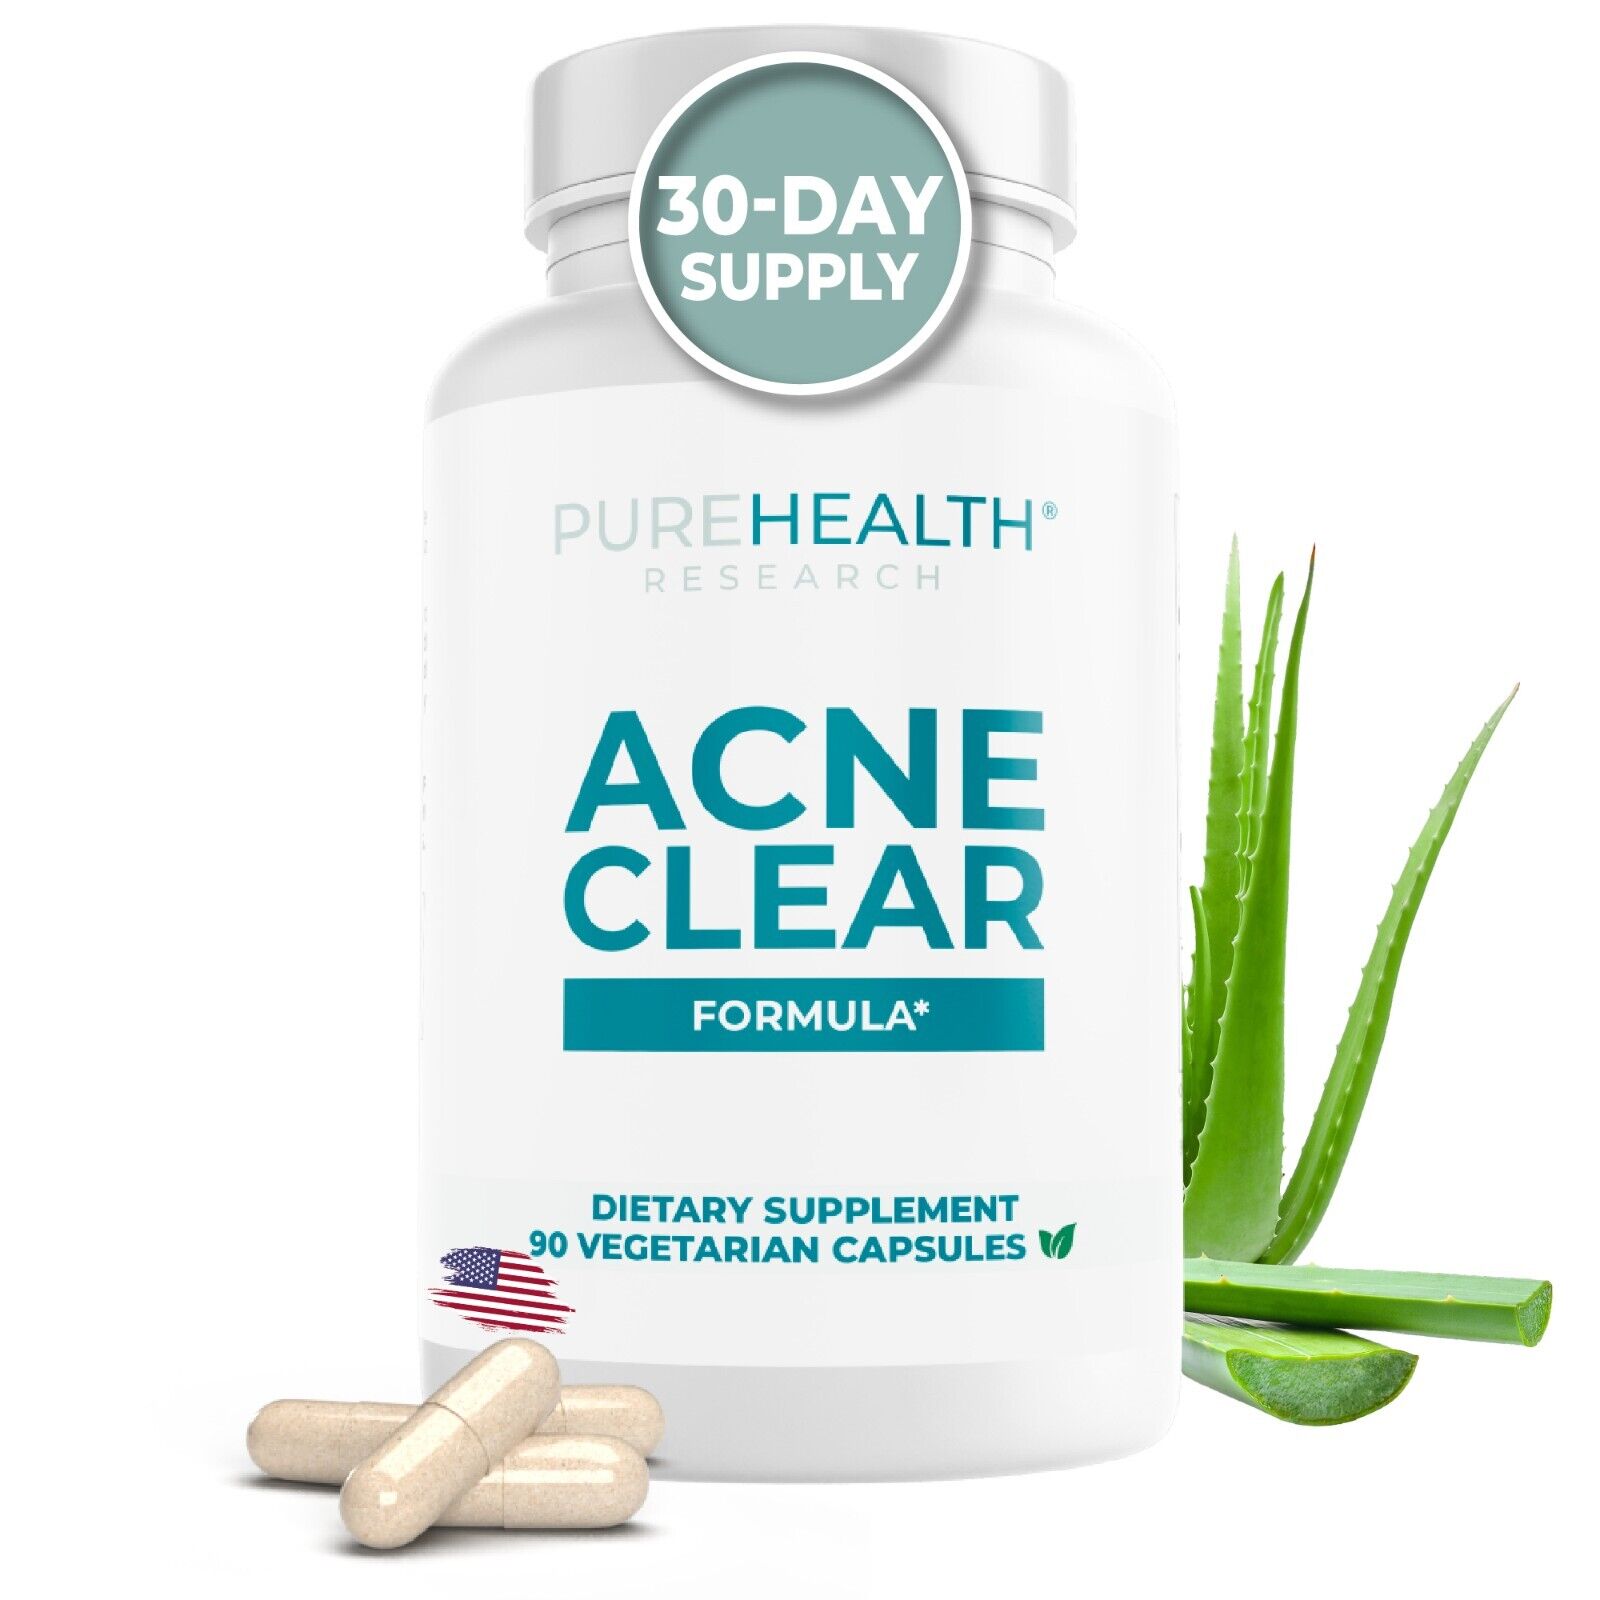 Acne Clear Formula for a Beautiful Complexion, by PureHealth Research